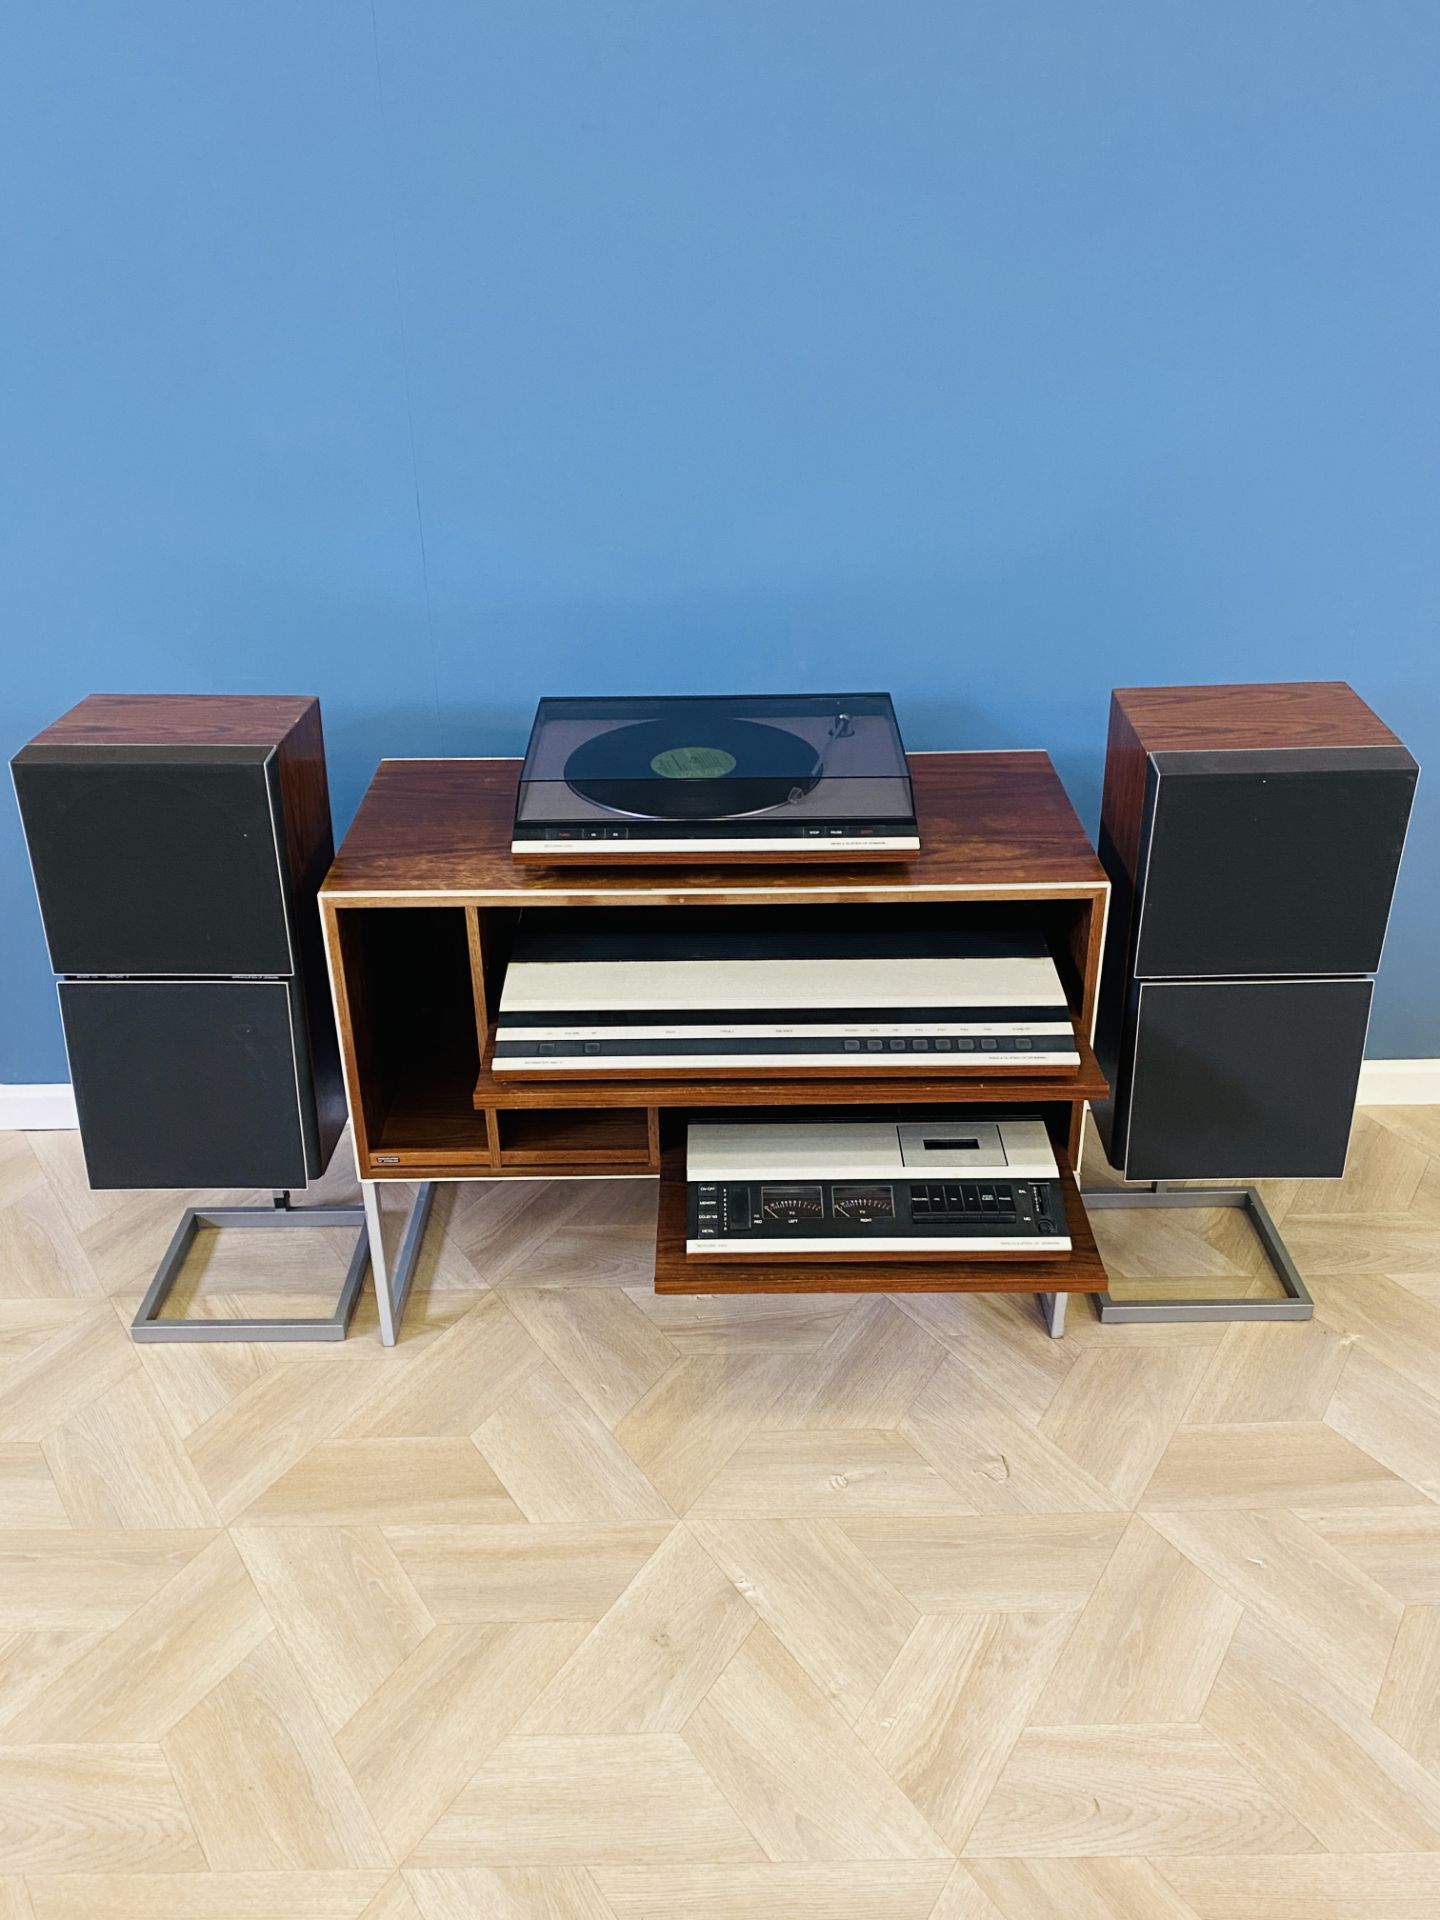 Bang & Olufsen Beomaster 1900-2; Beocord 2400, Beogram 2200 on stand; & Beovox S50's - Image 6 of 9